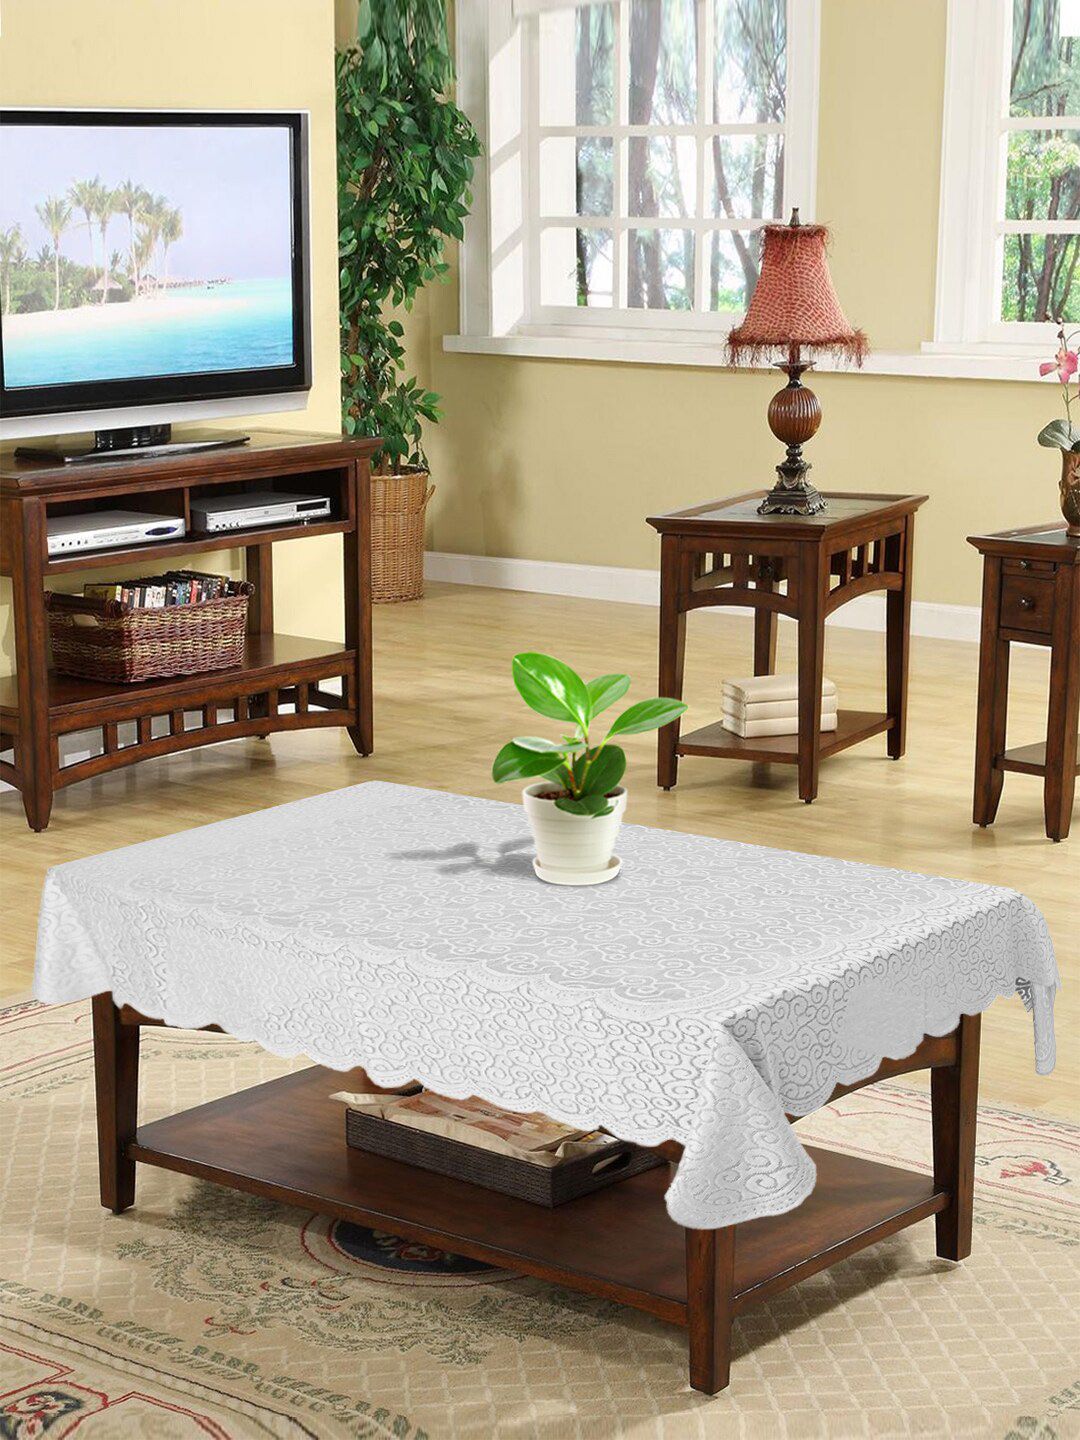 Kuber Industries White Self-Design 4 Seater Cotton Table Cover Price in India